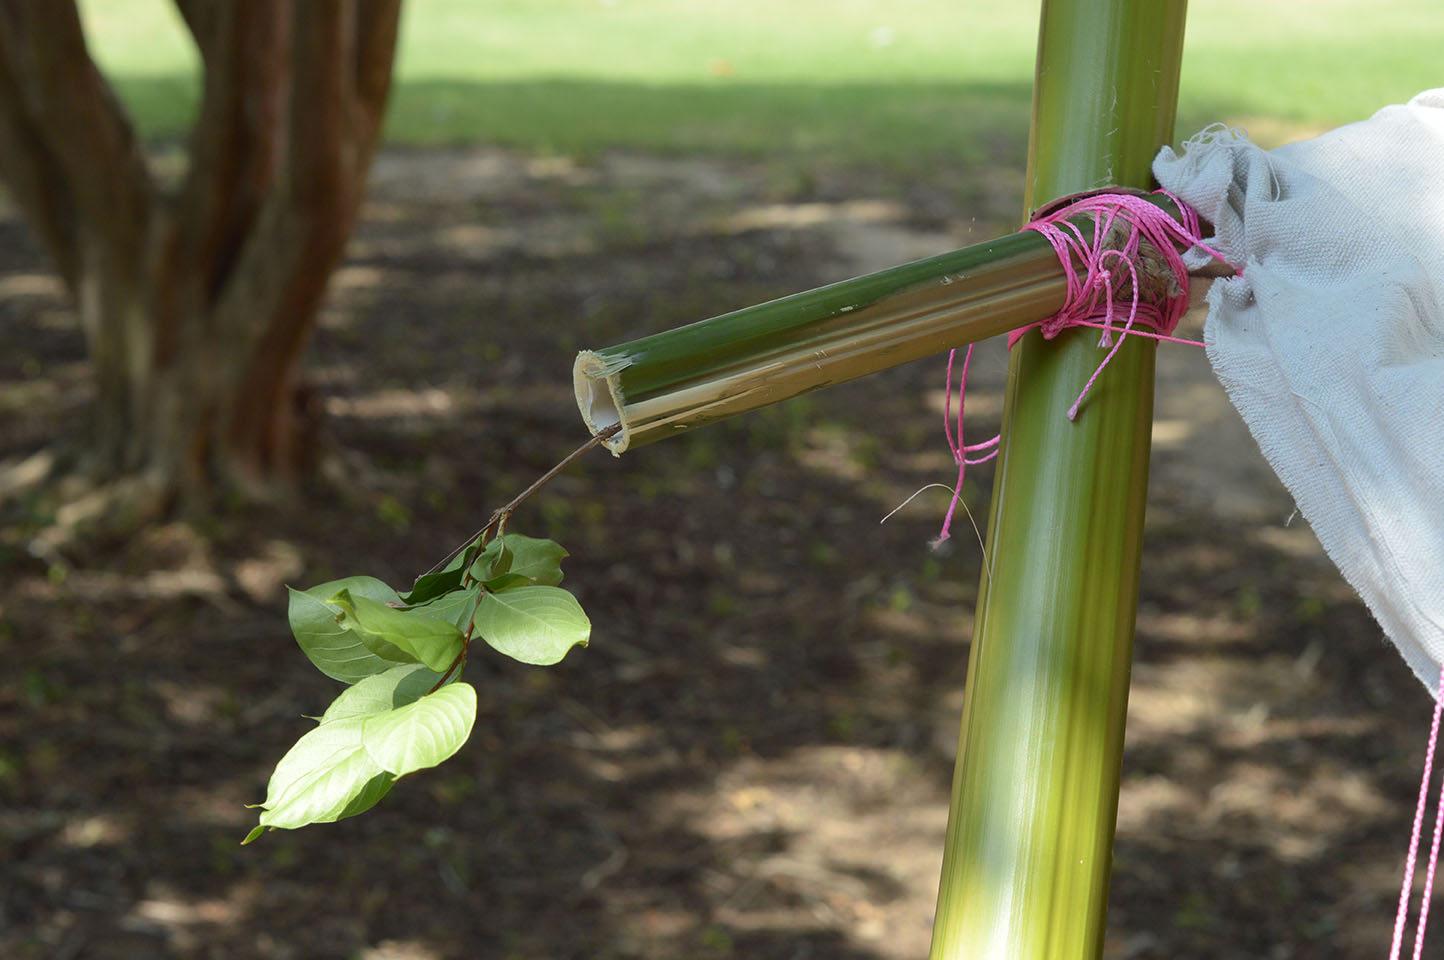 Twine holding cloth to bamboo stalk